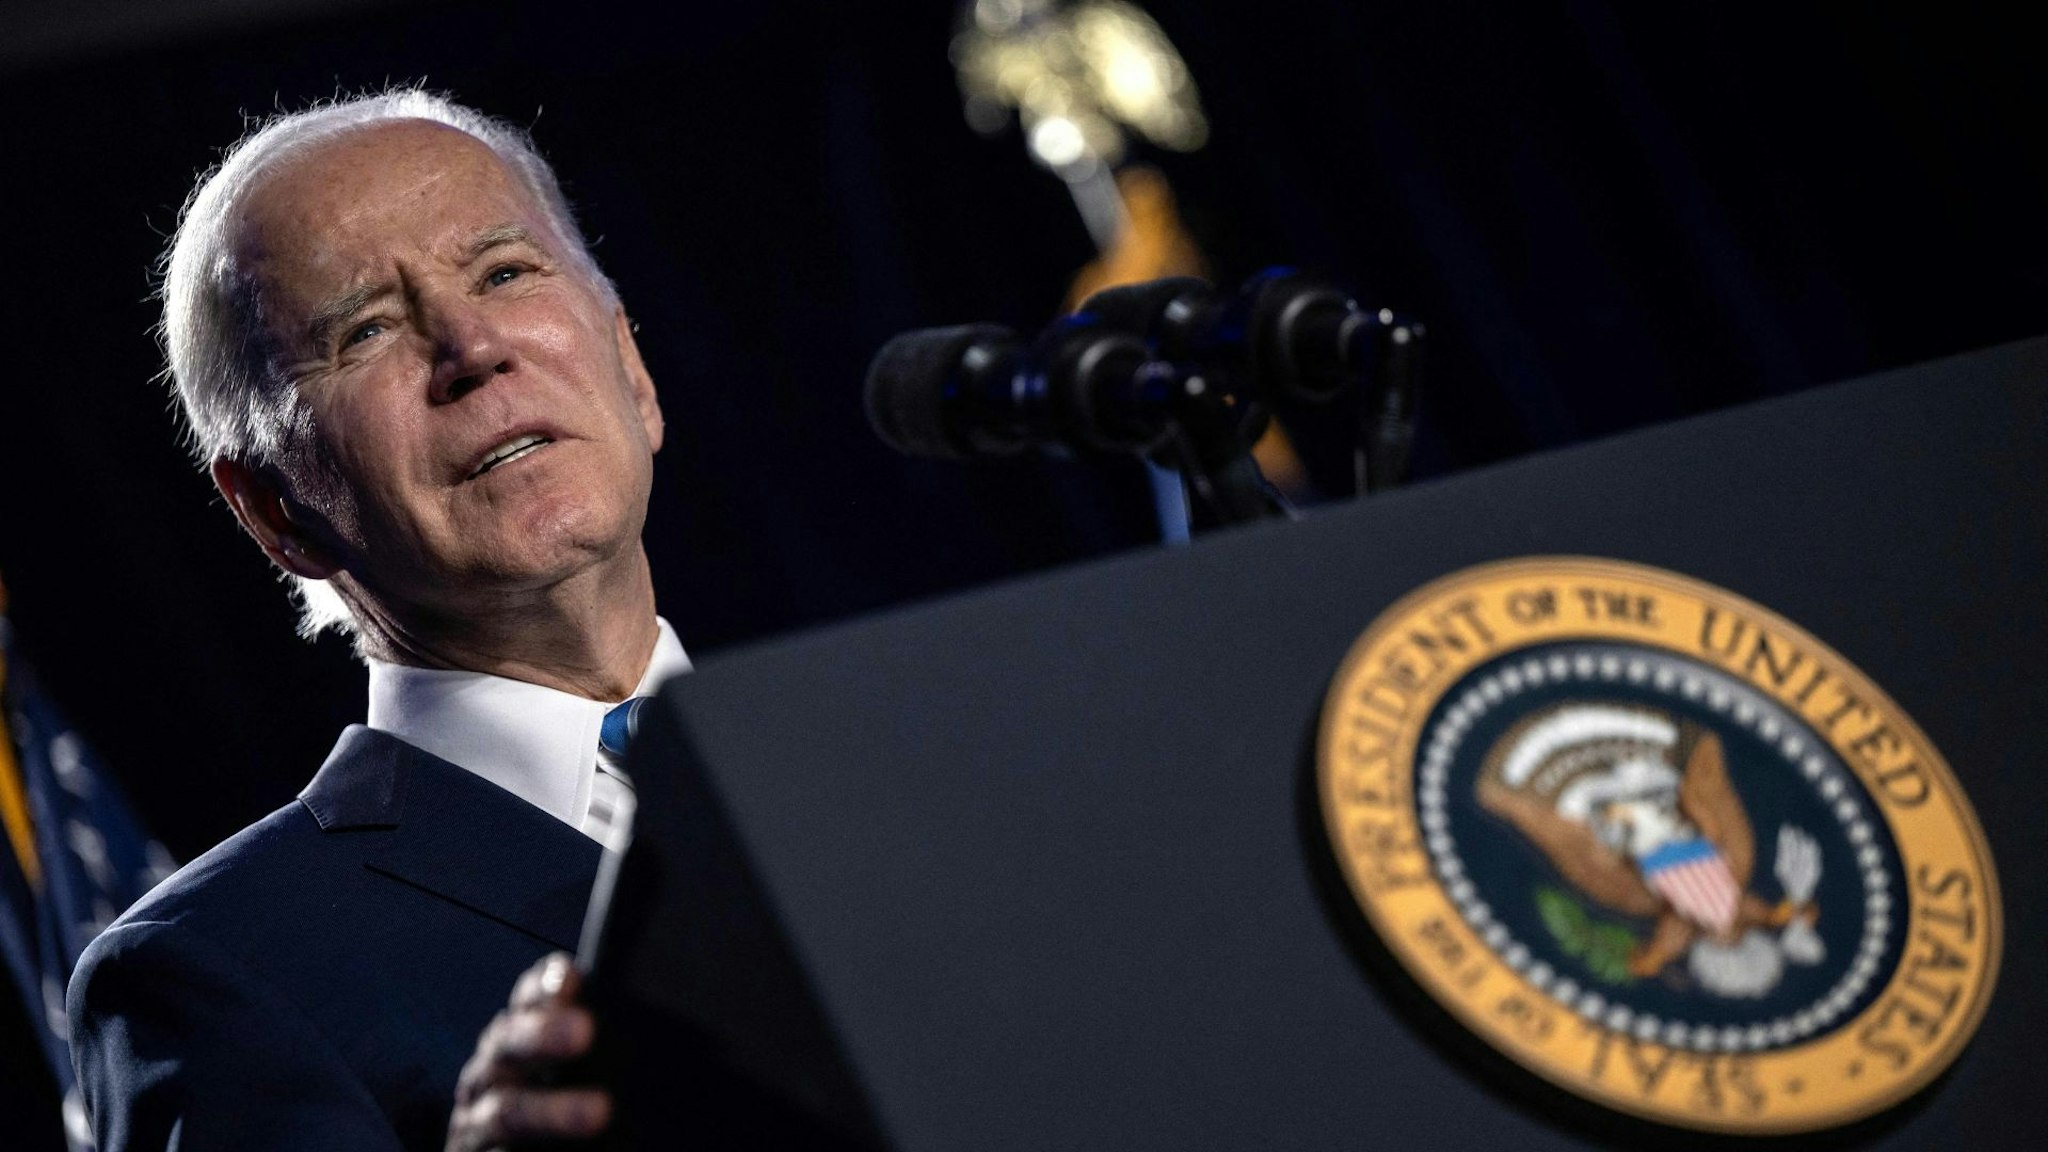 US President Joe Biden speaks during the House Democratic Caucus Issues Conference at the Hyatt Regency Inner Harbor in Baltimore, Maryland, on March 1, 2023.